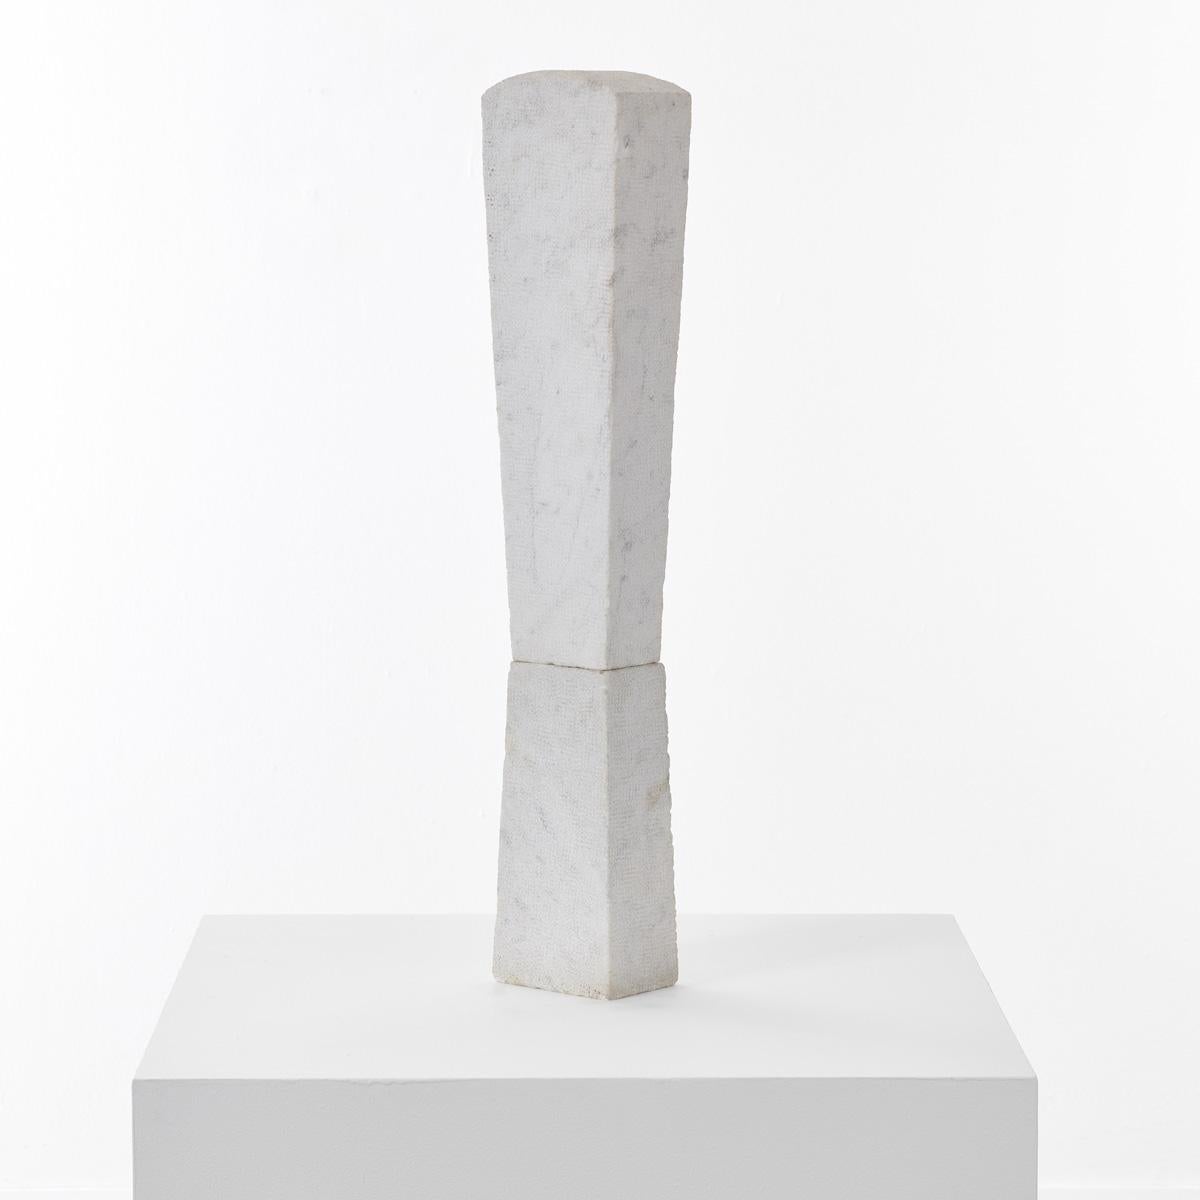 A towering sculpture hand carved from marble in two parts. The top part has had its surfaces finely chiselled to create a fine surface texture. The bottom element is chiselled more roughly in a linear pattern. A metal rod running through the centre